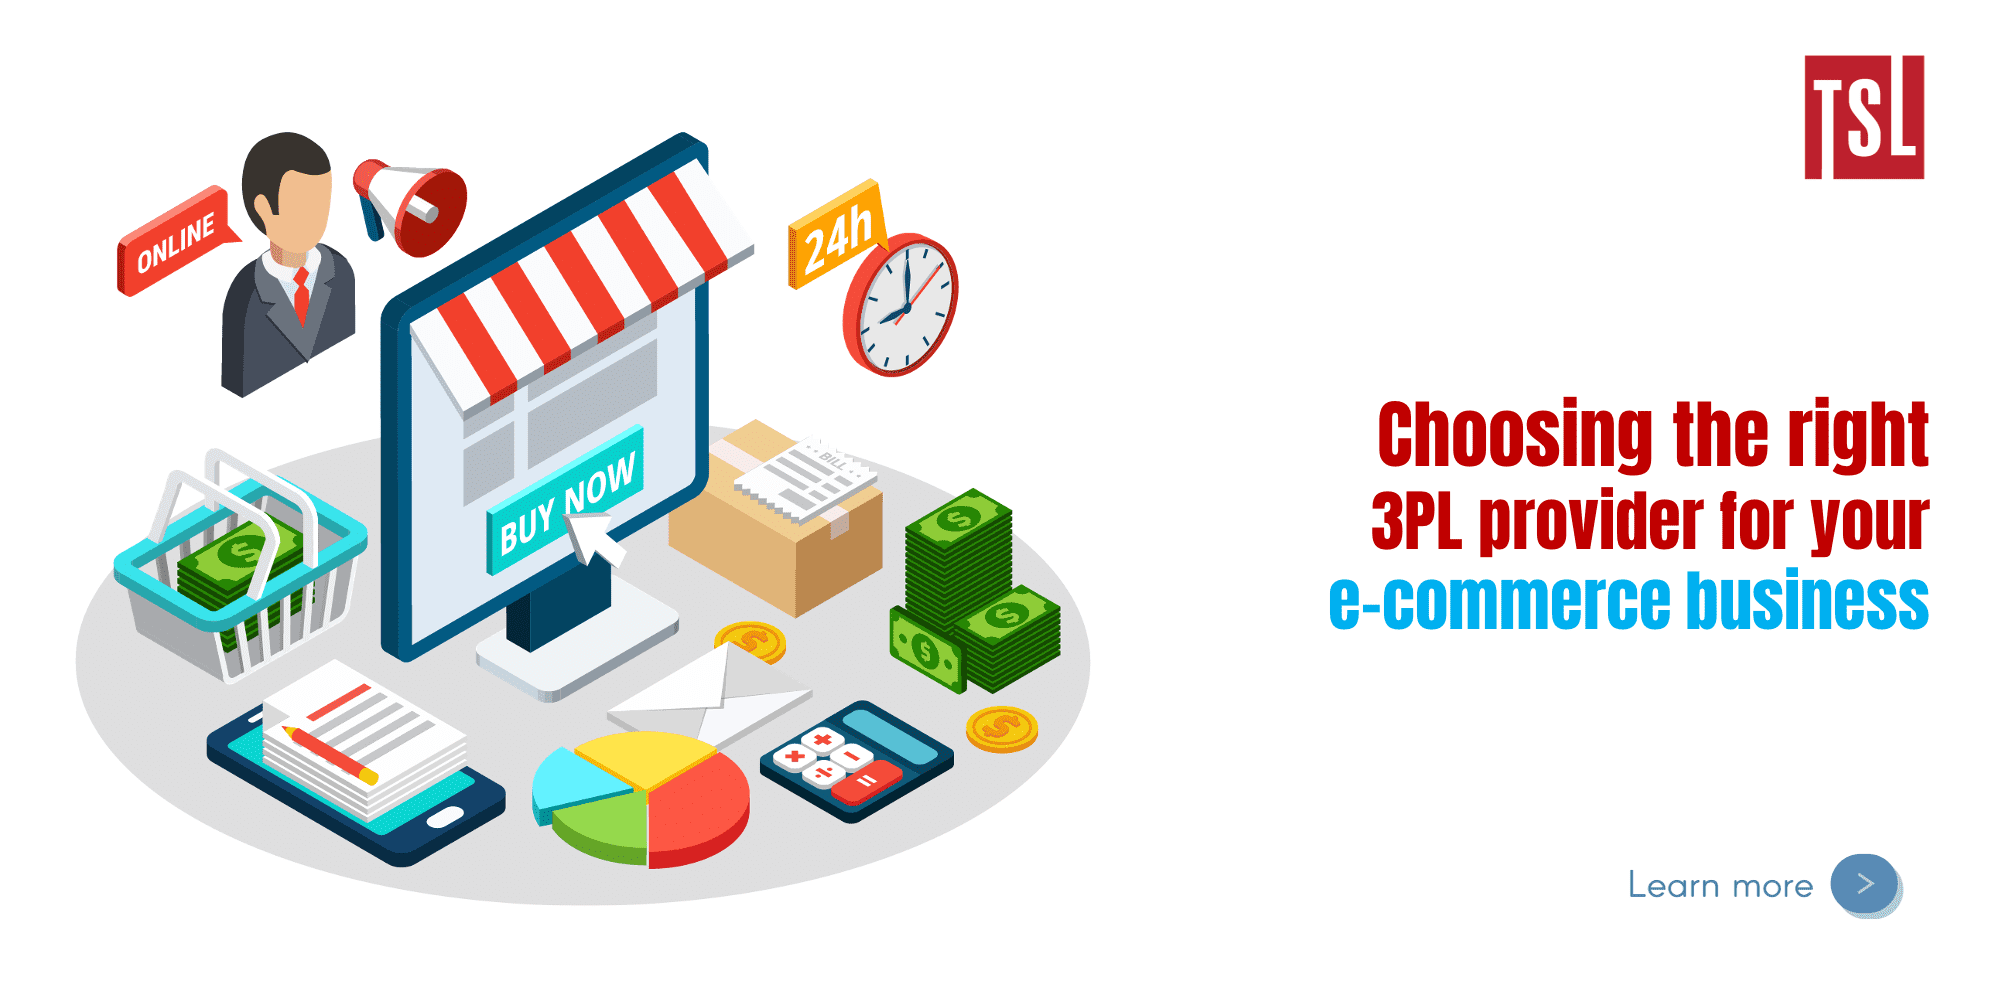 Choosing the right 3PL provider for your e-commerce business